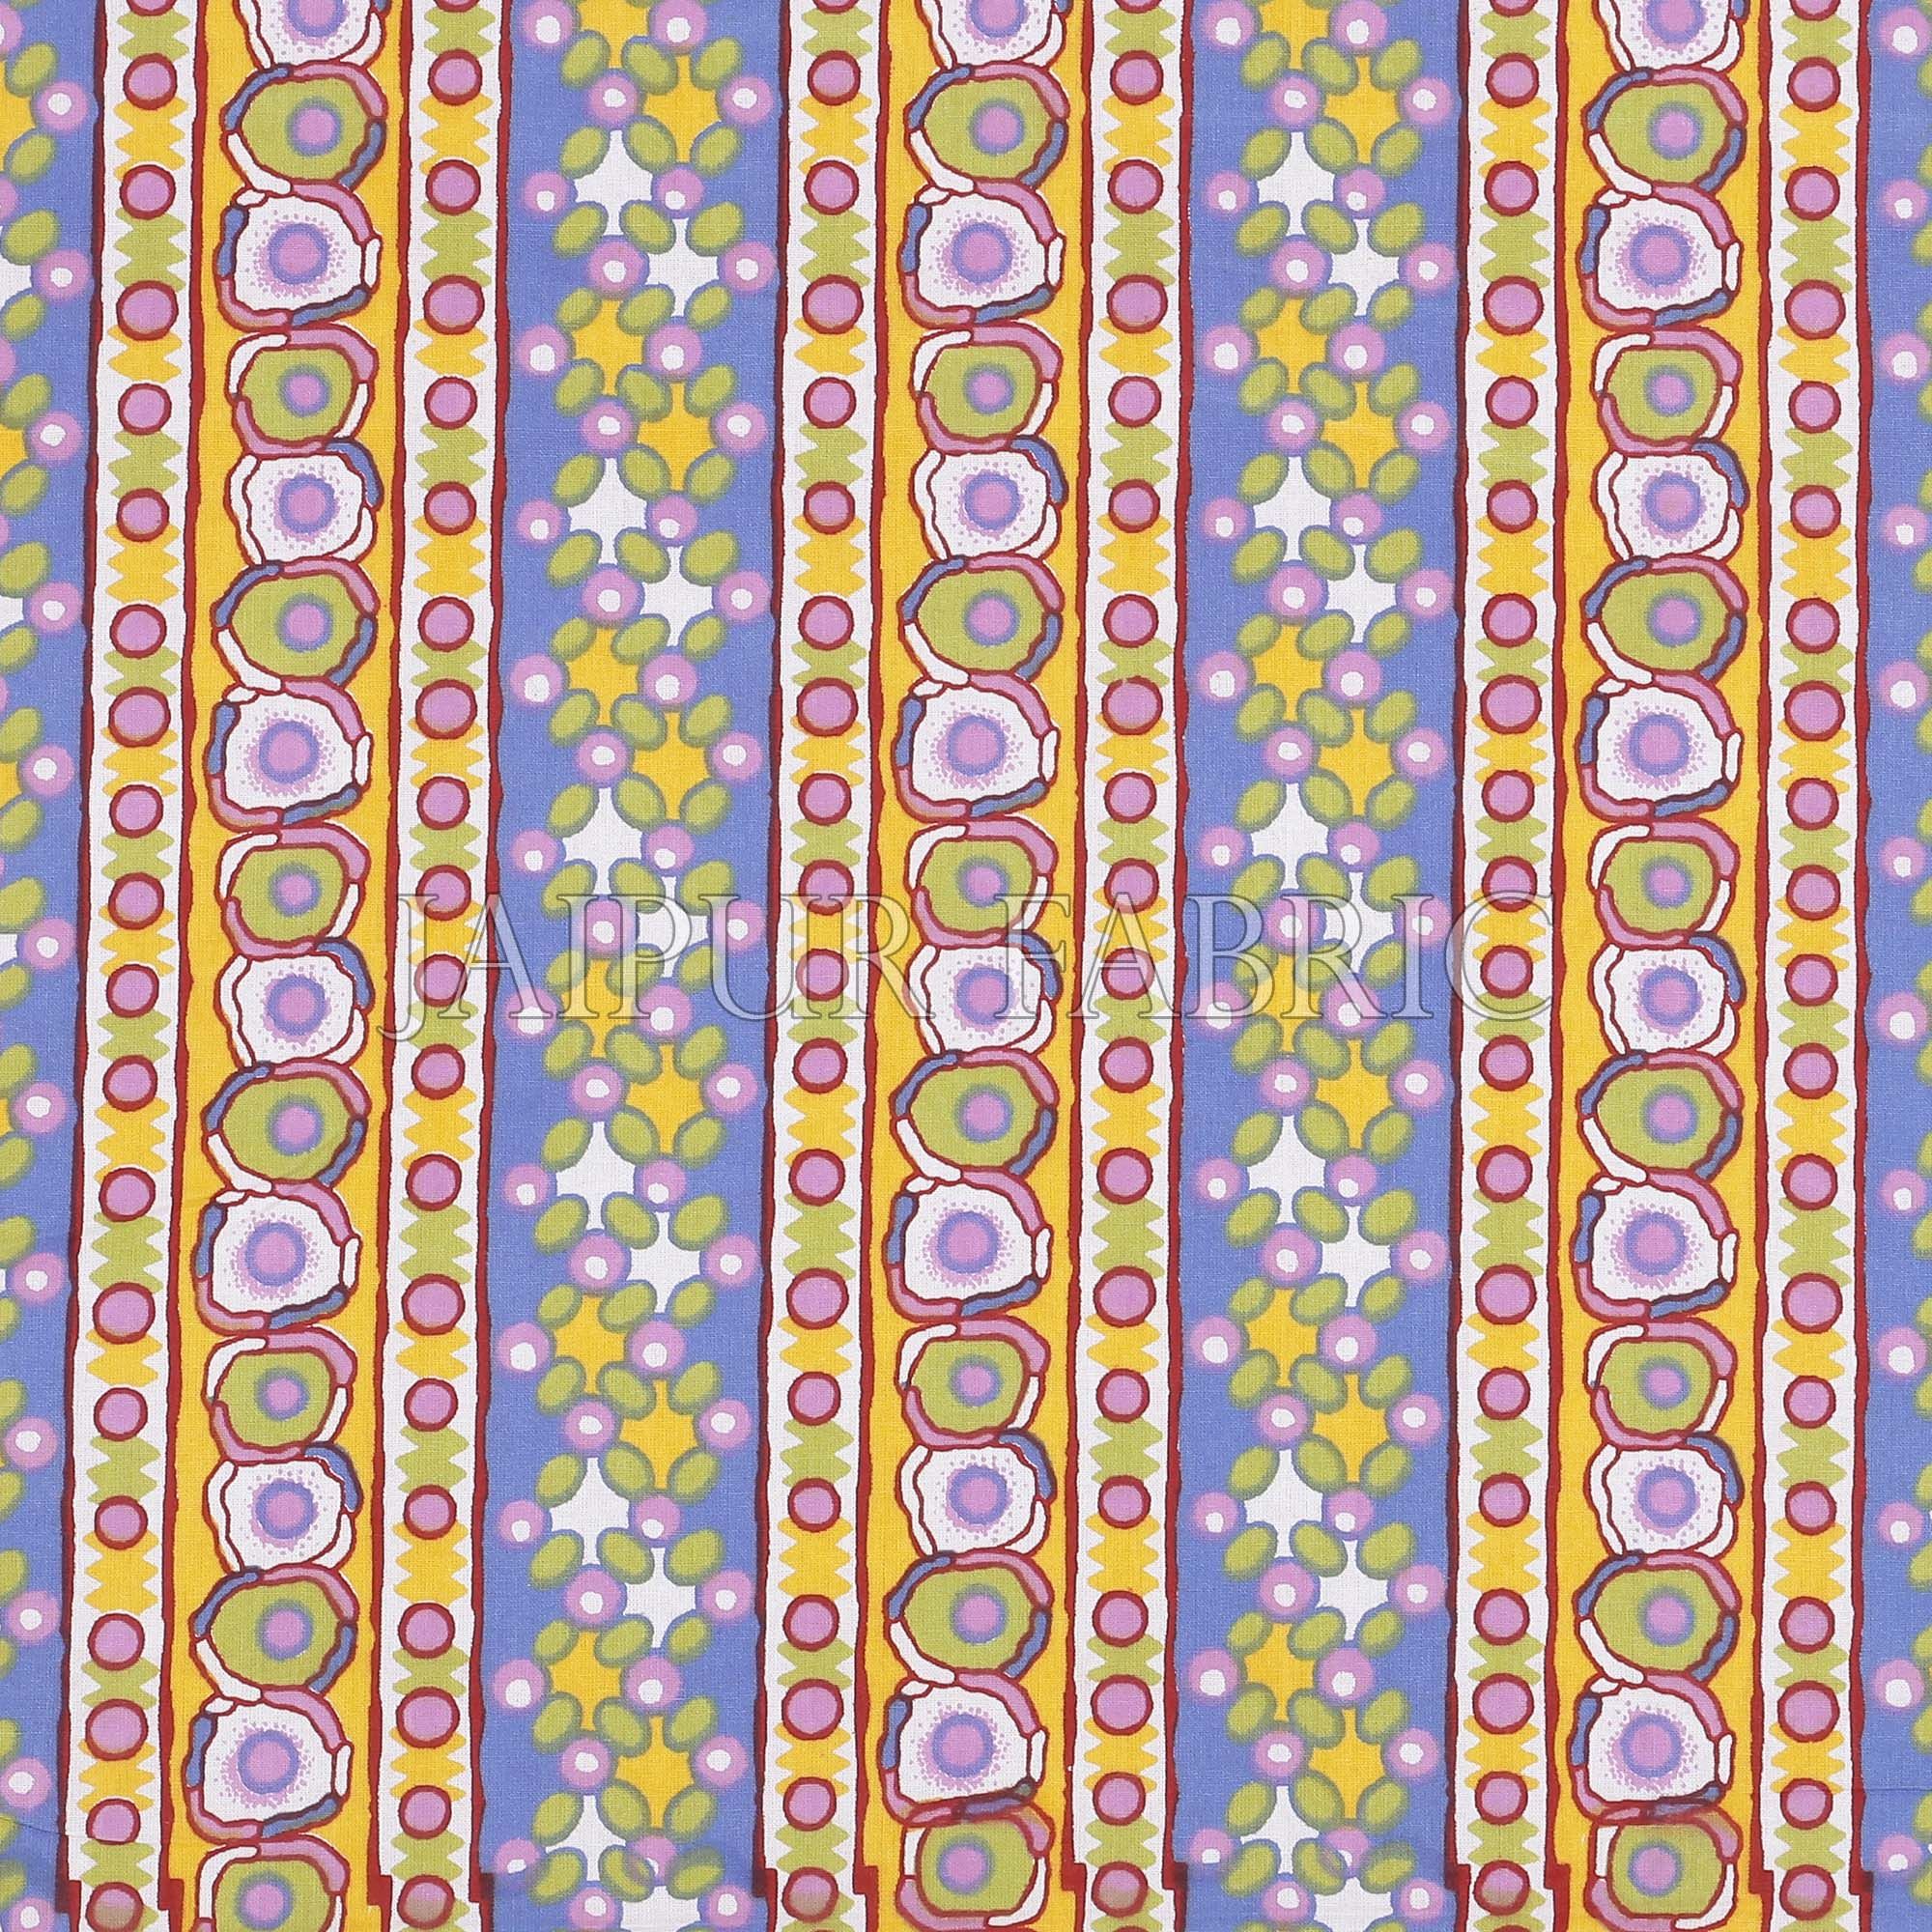 Yellow Border Multi Color Patchrs Screen Print Cotton Double Bed Sheet